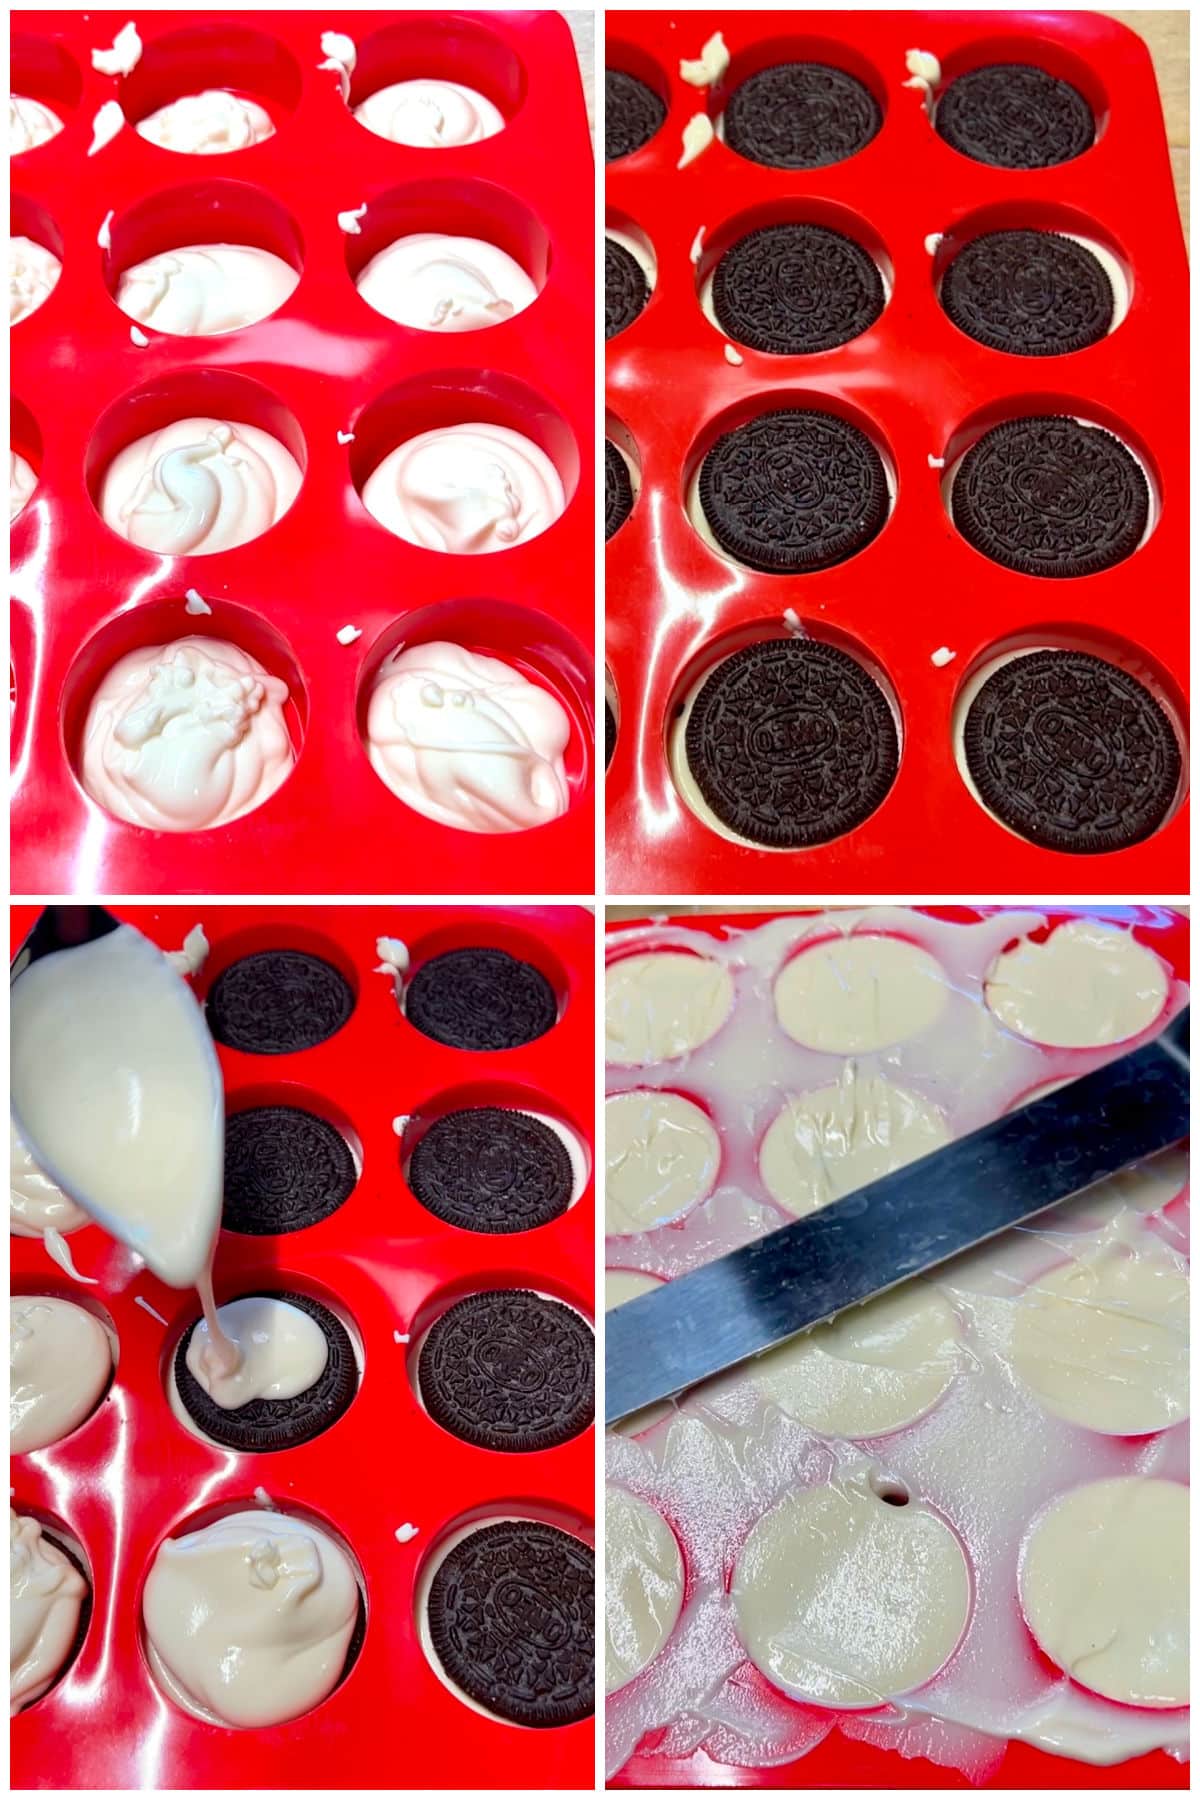 How to Make Chocolate-Covered Oreos Using a Mold